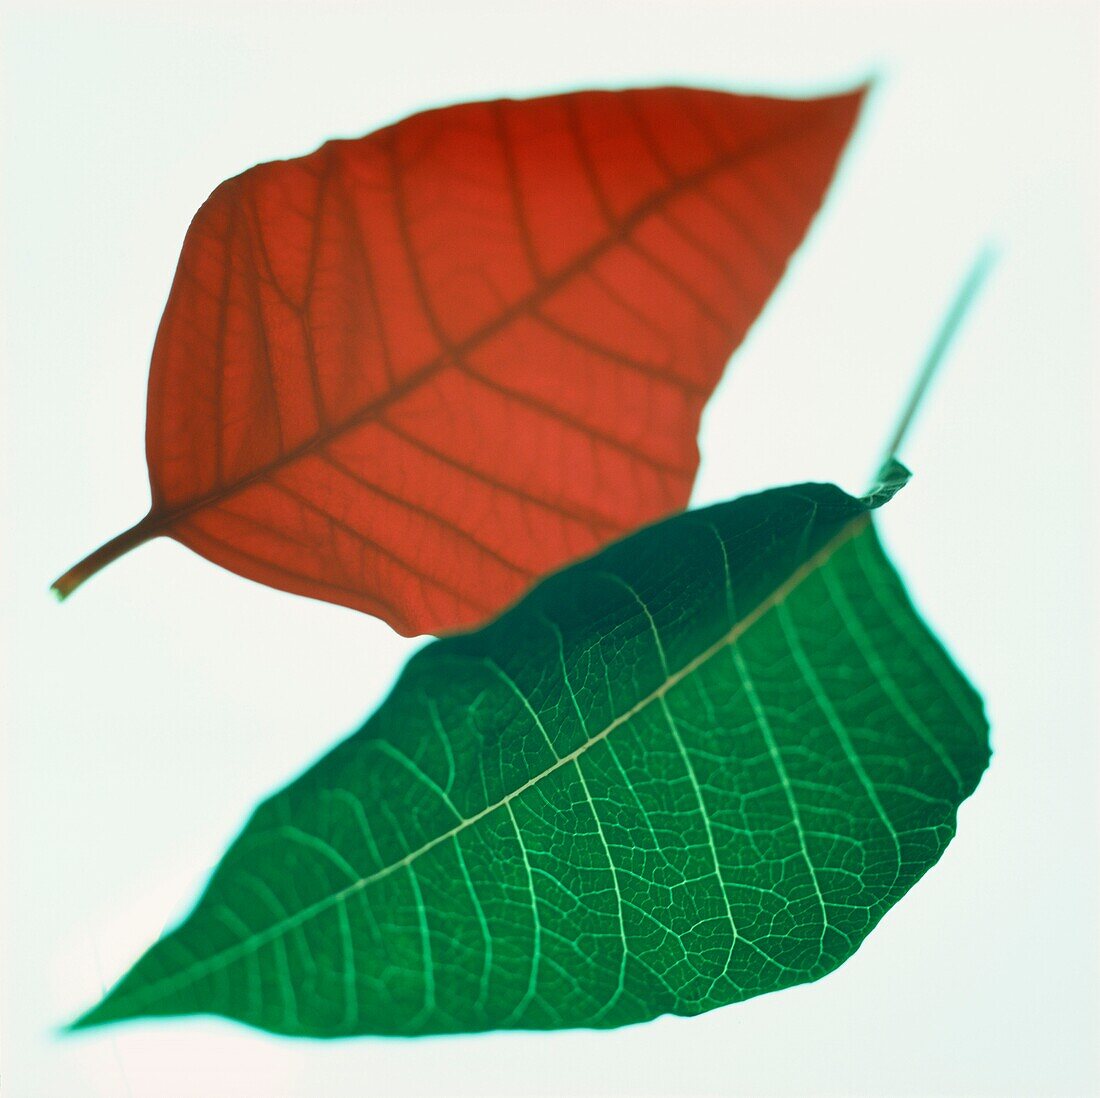 Abstract of red and green poinsettia leaves